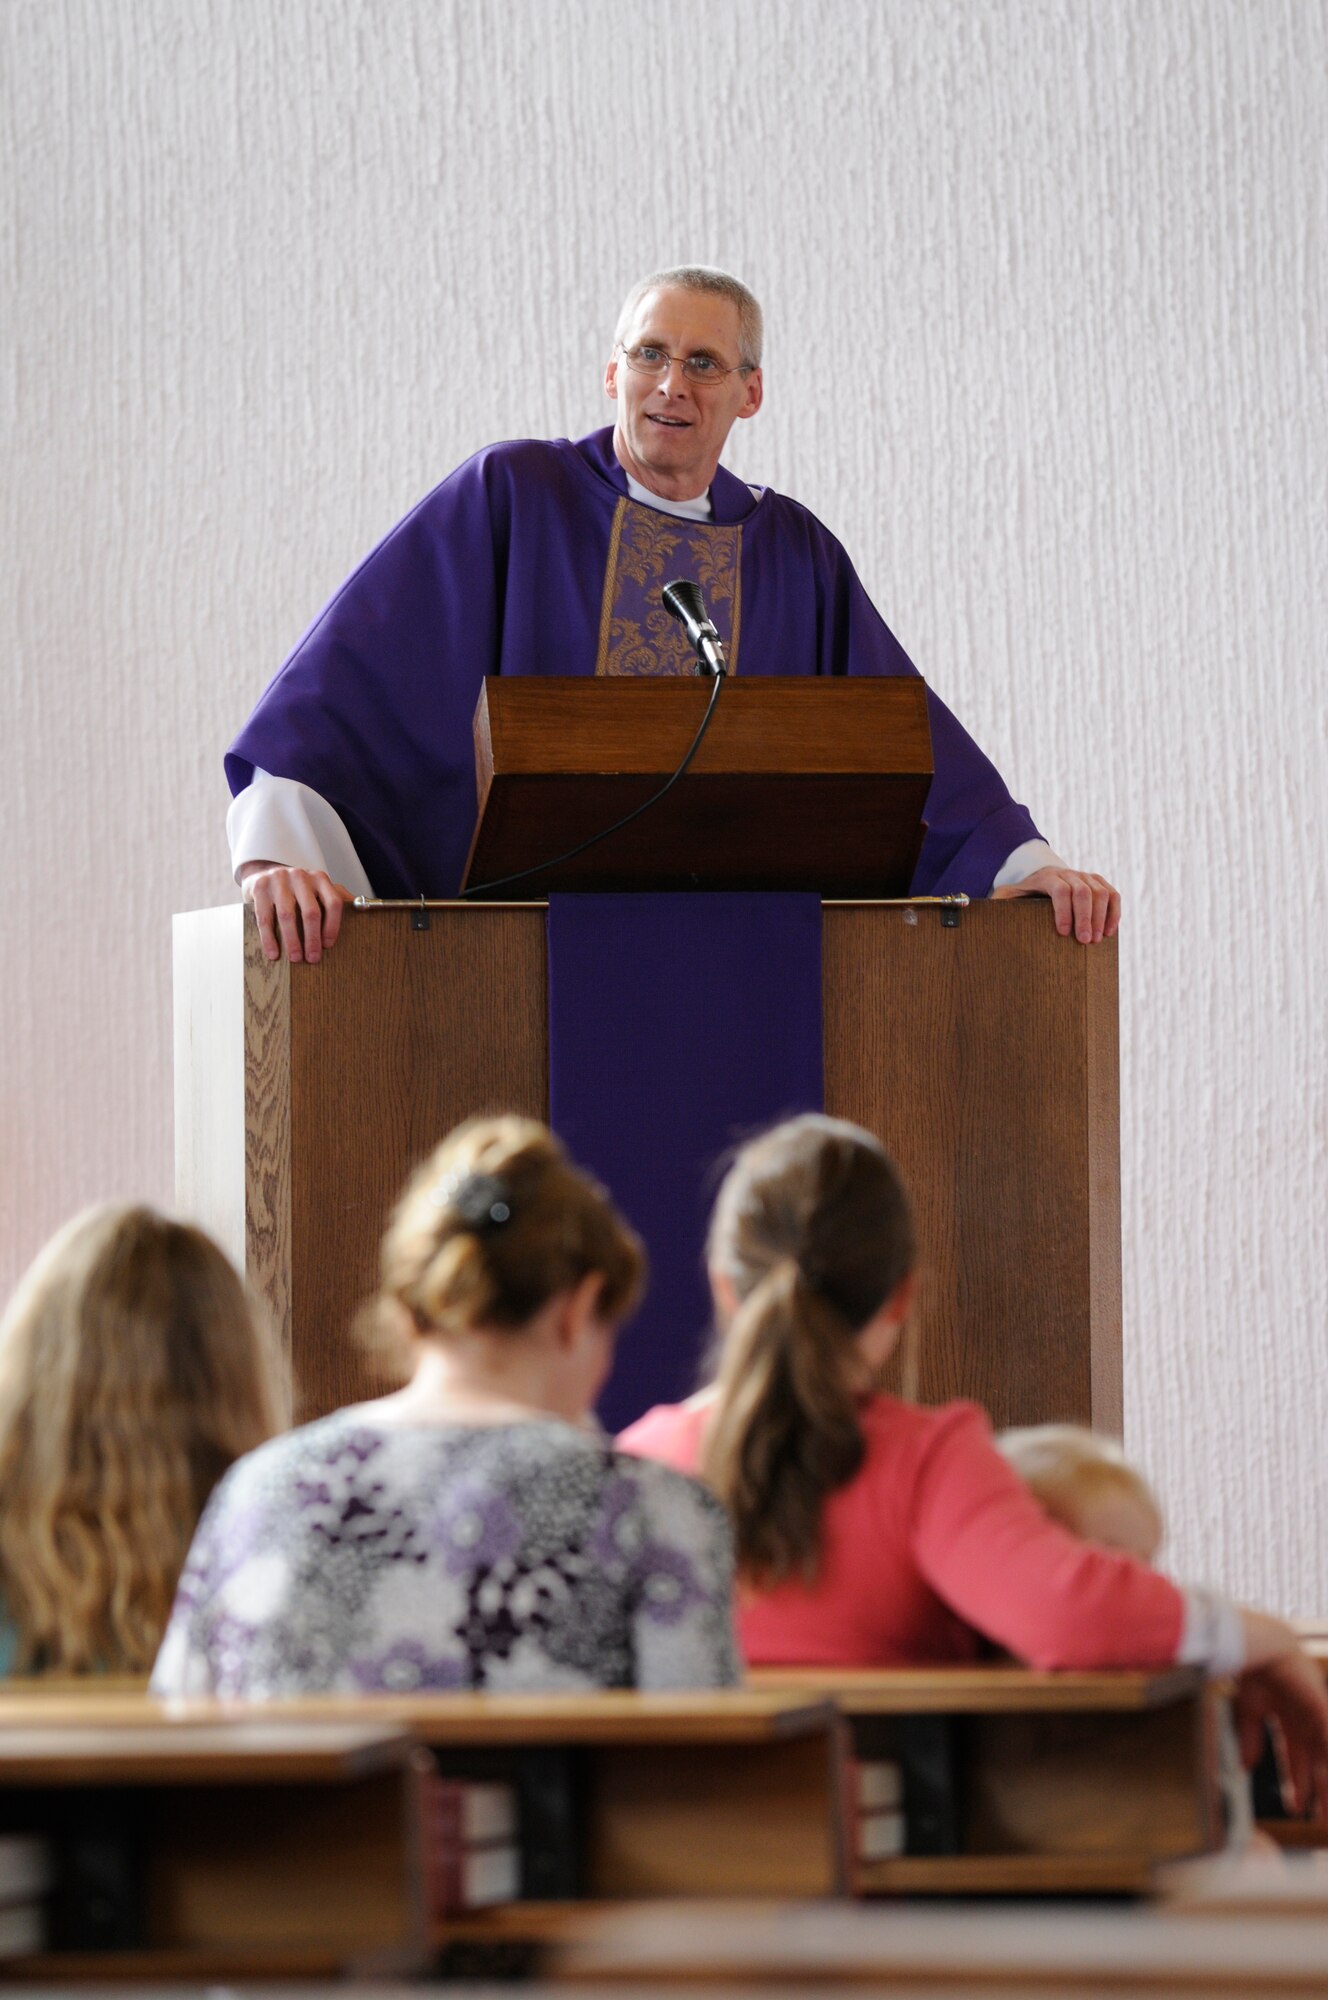 Capt. David McGuire, Chaplain, 86th Airlift Wing, preaches to a congregation in the North Side Chapel, Ramstein Air Base, Germany, Feb. 25, 2010. Capt. McGuire was a pastor for The Catholic Diocese of Richmond, Va., before joining the Air Force in 2007. "I wanted to contribute and help active duty members and their families," said Capt. McGuire. (U.S. Air Force photo by Airman 1st Class Brittany Perry)